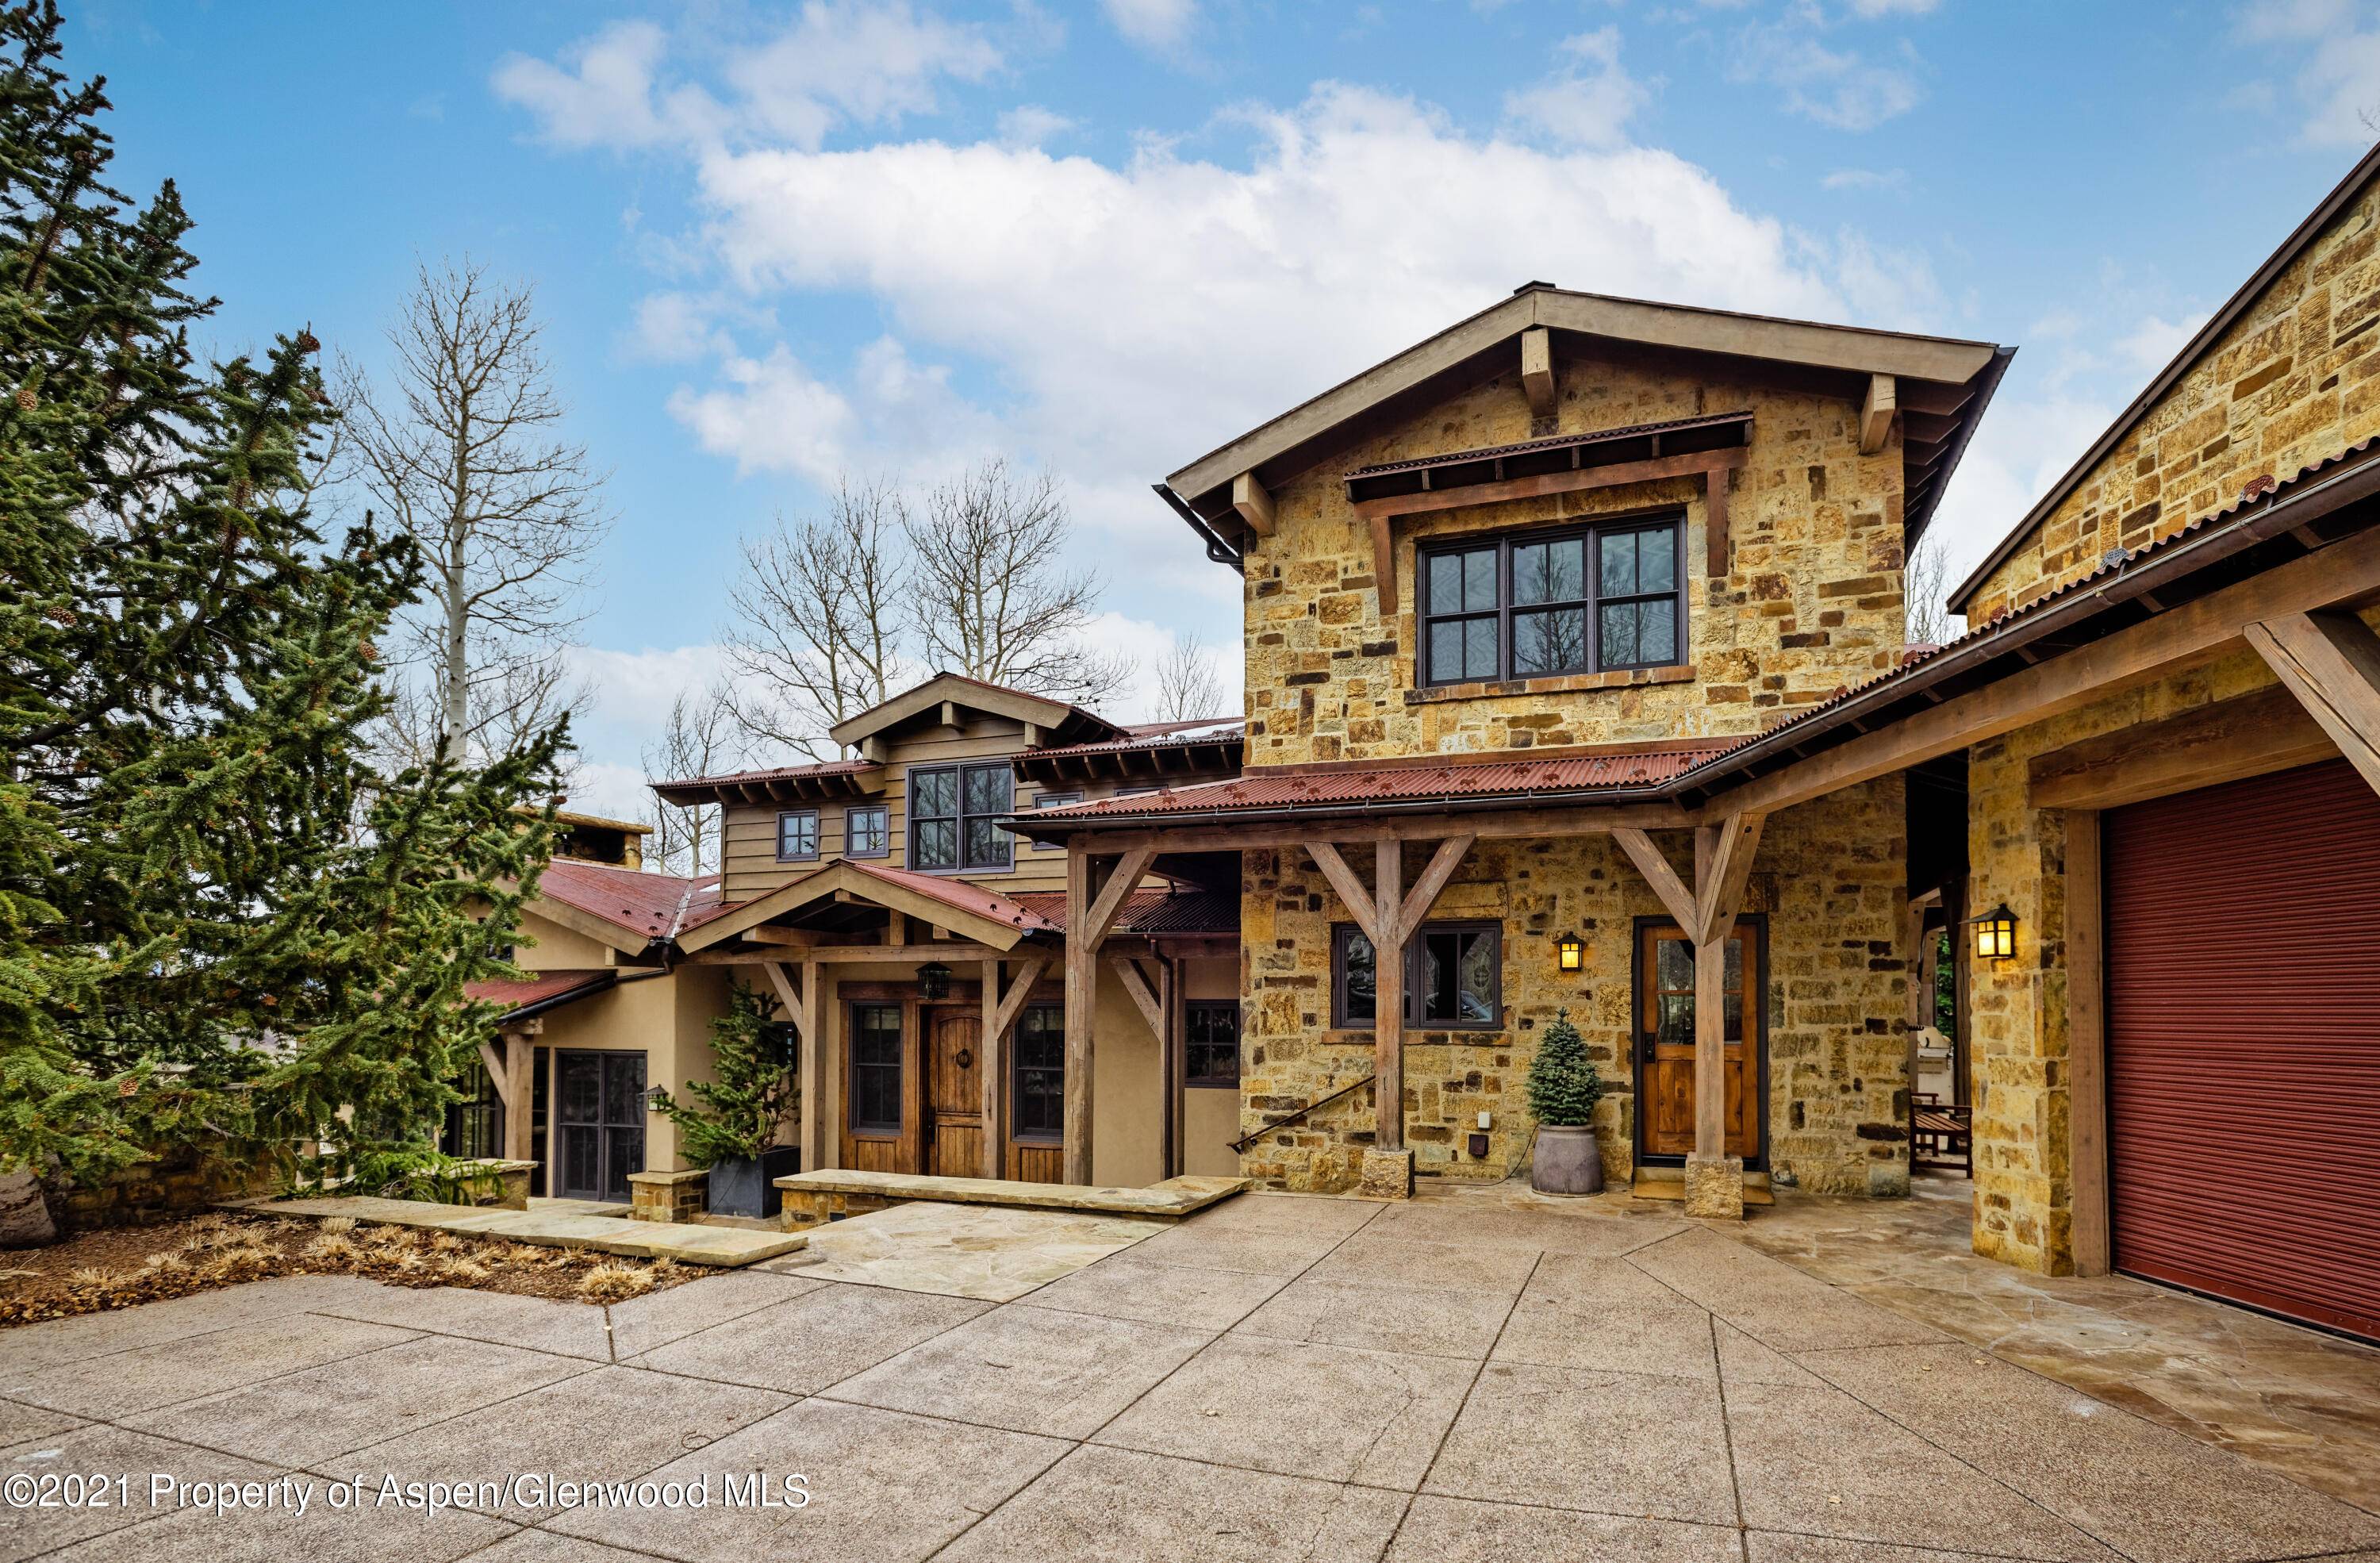 This elegant mountain home in Snowmass' Divide neighborhood has it all over 5, 900 square feet with mountain views, privacy and prime ski access.